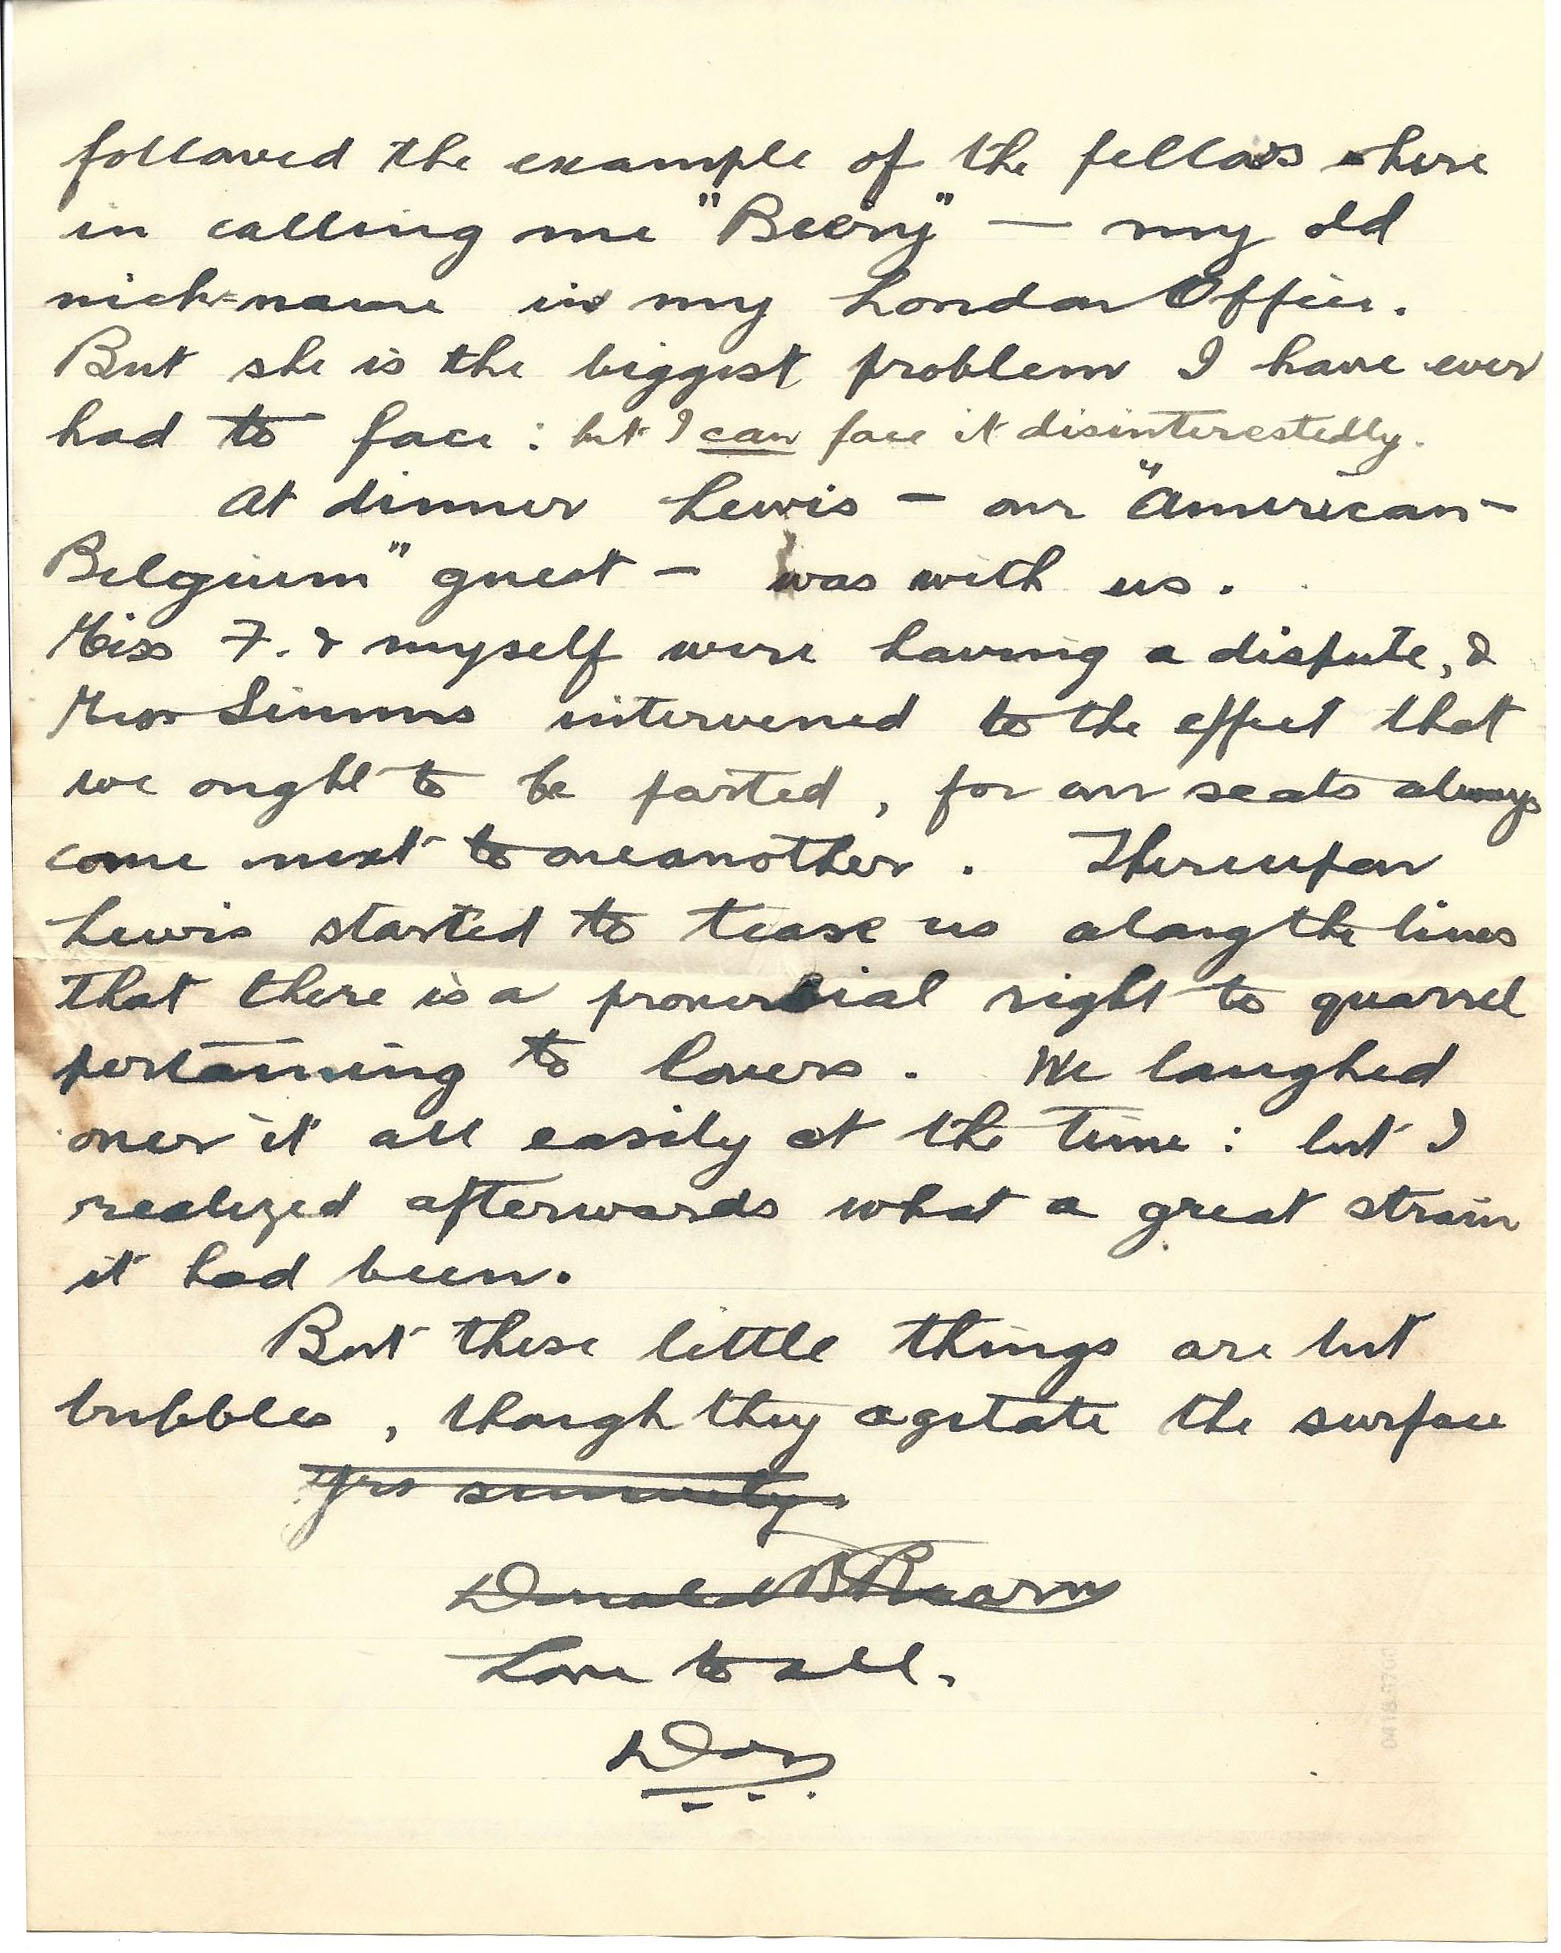 1920-09-26 p2 Donald Bearman letter to his father